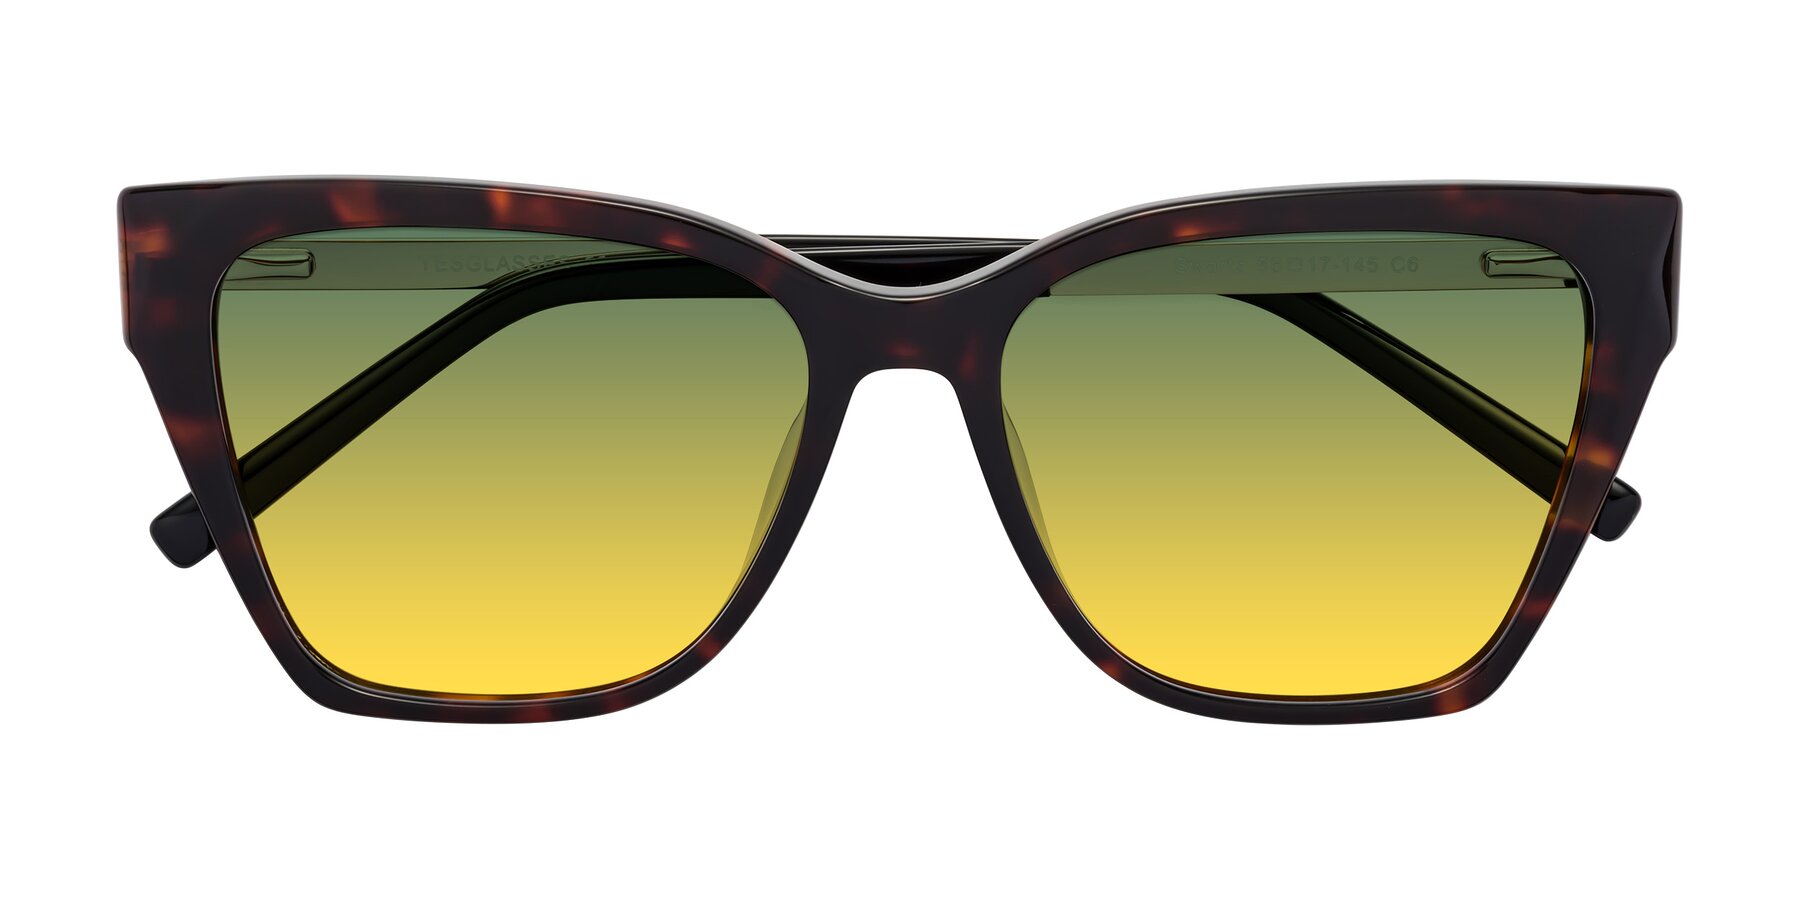 Folded Front of Swartz in Tortoise with Green / Yellow Gradient Lenses